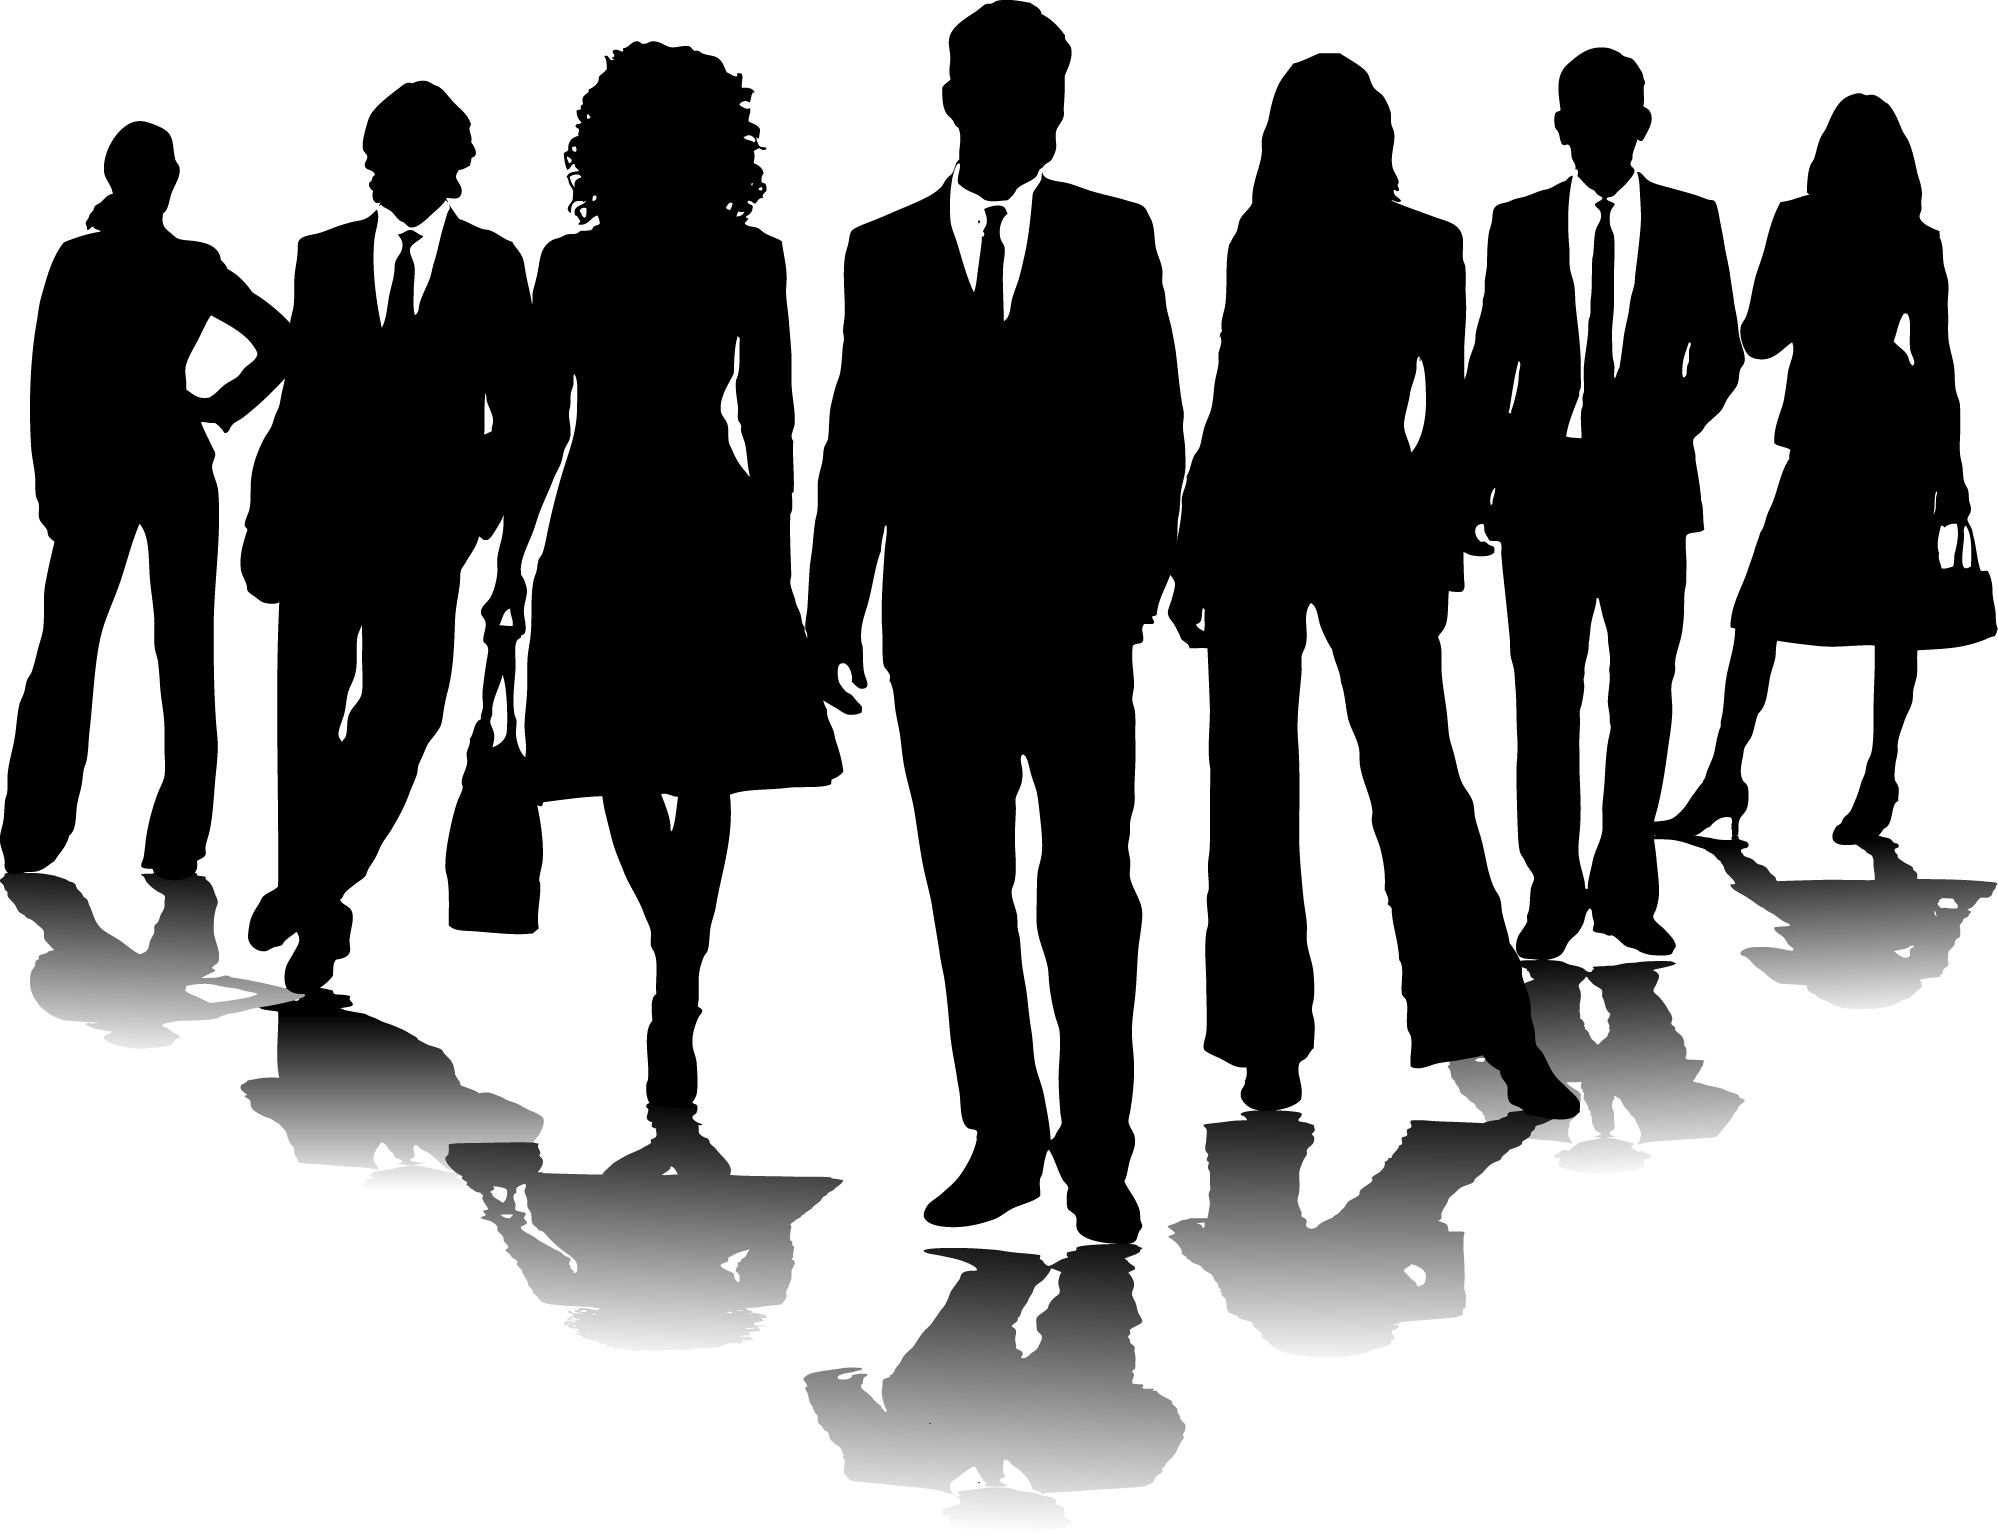 Office People Images | Clipart Panda - Free Clipart Images